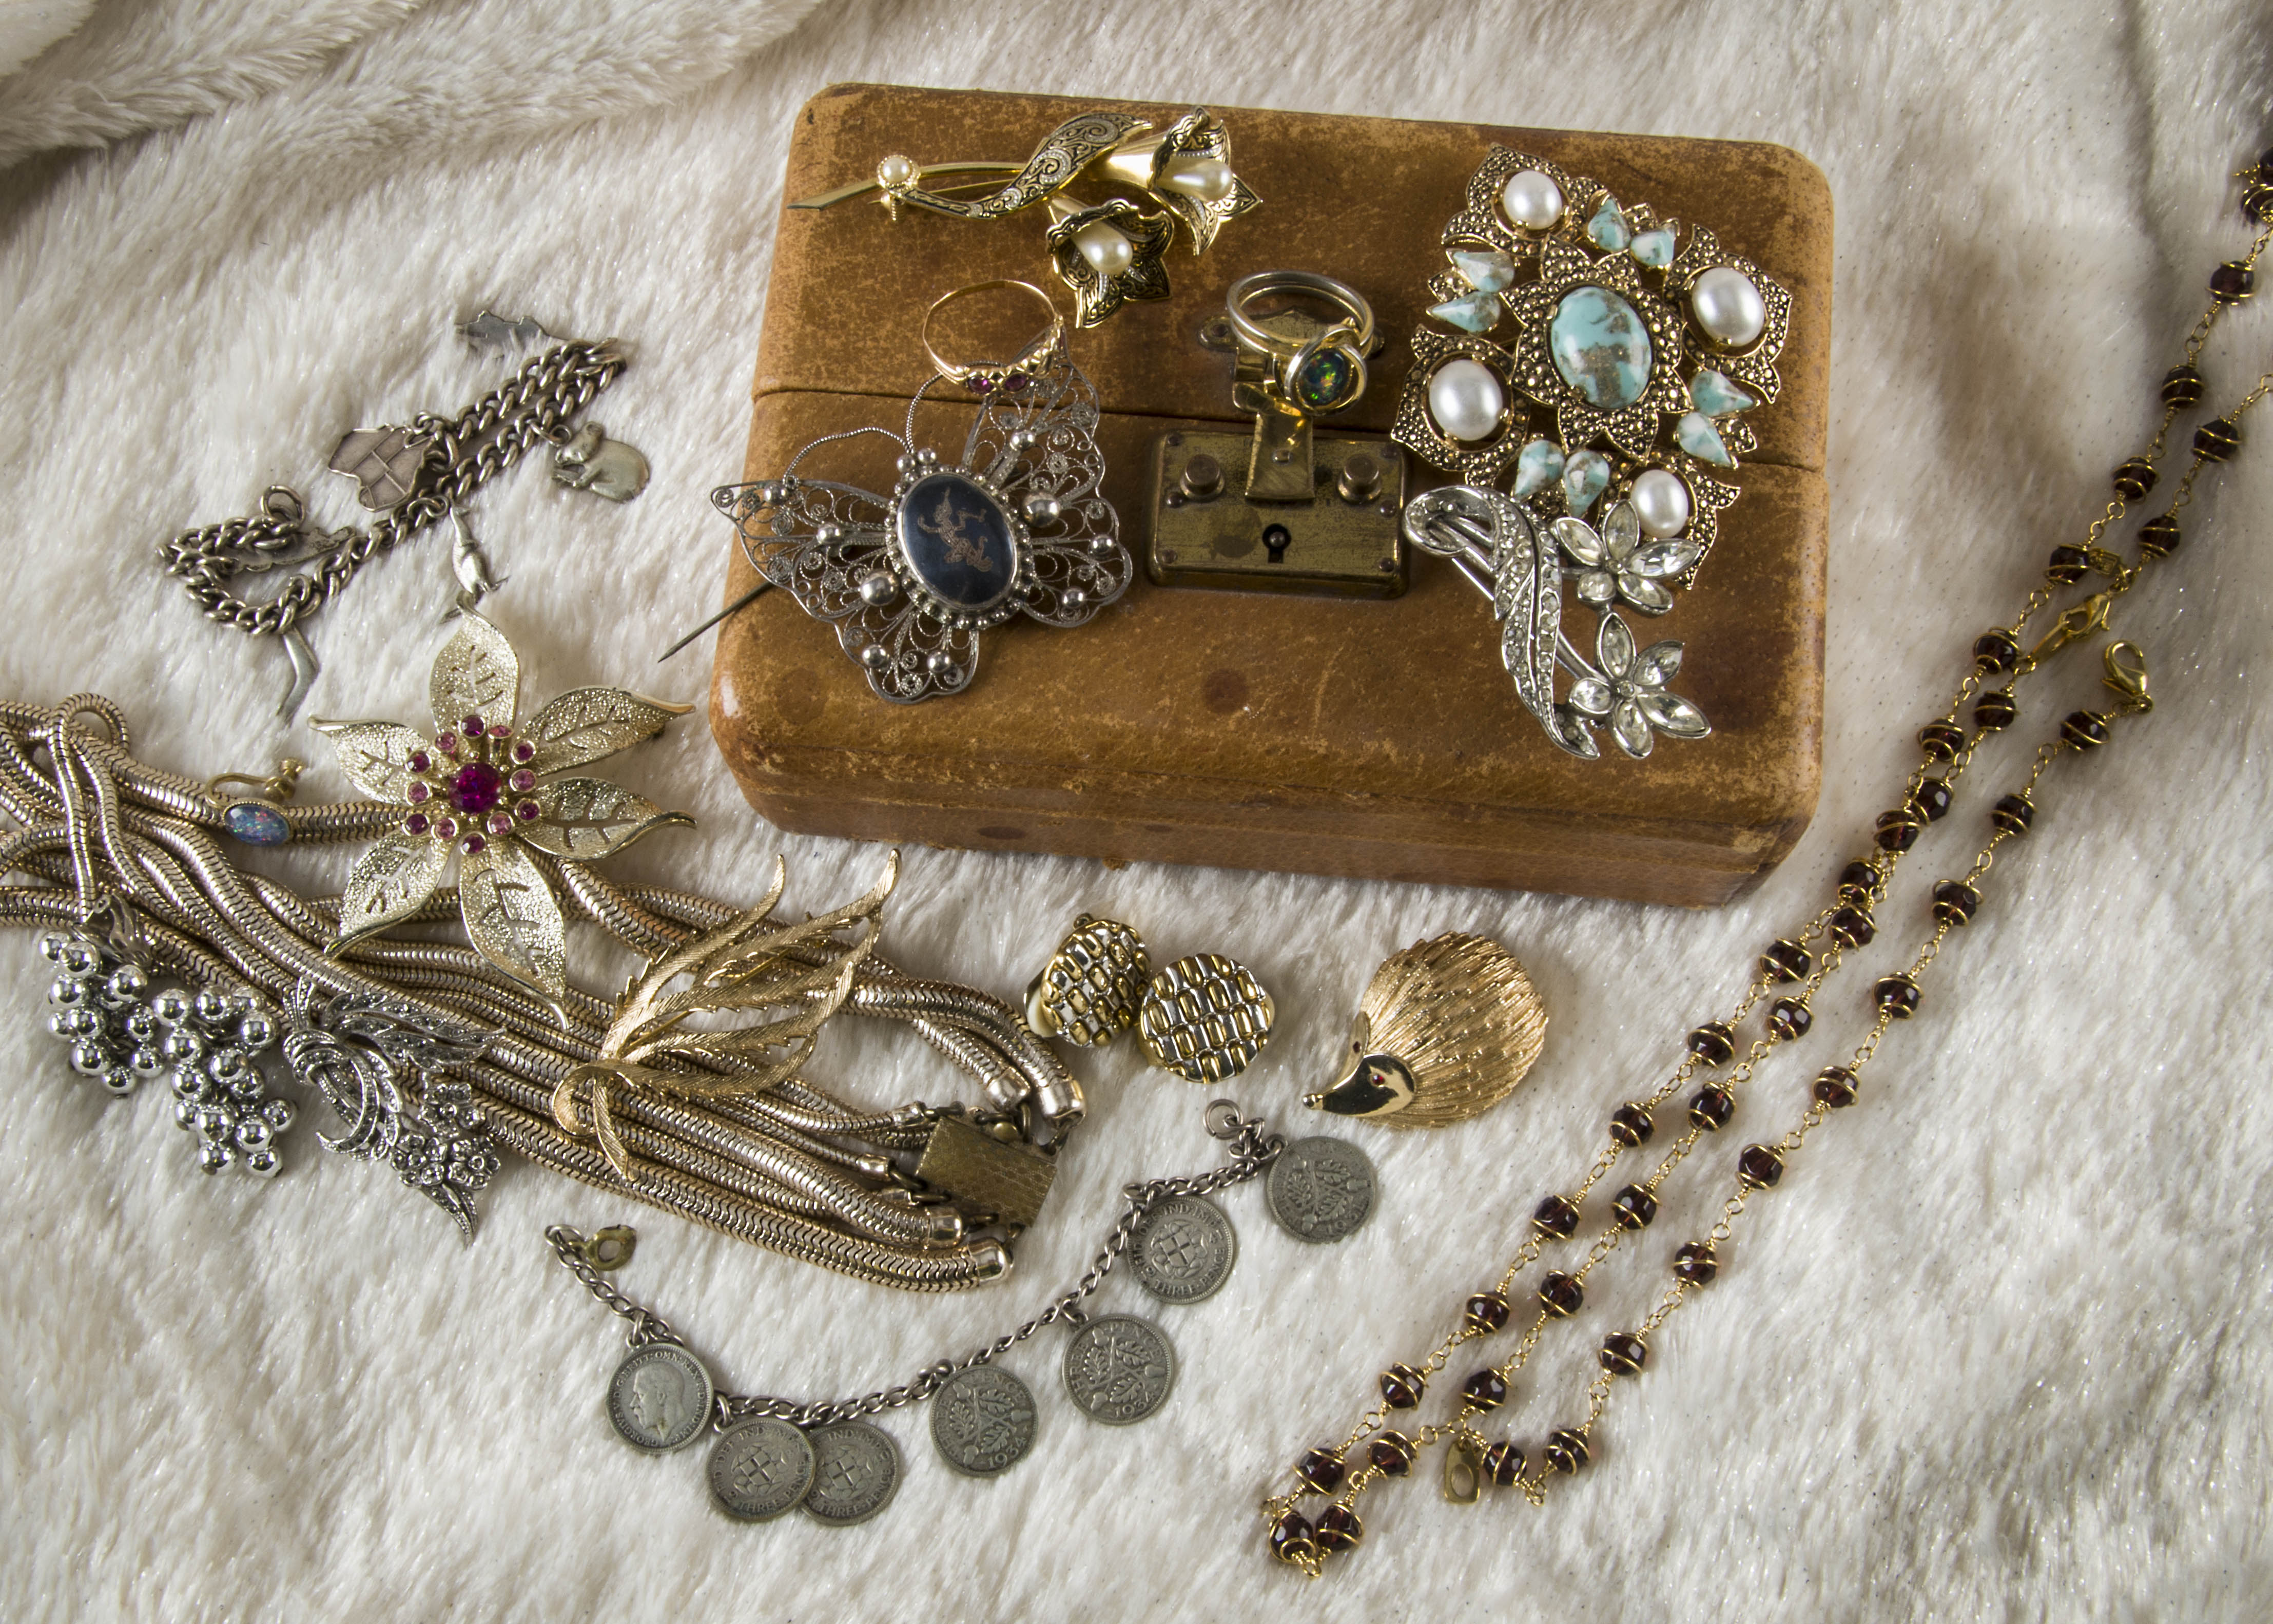 A group of costume jewellery, with a brown jewellery box (parcel)